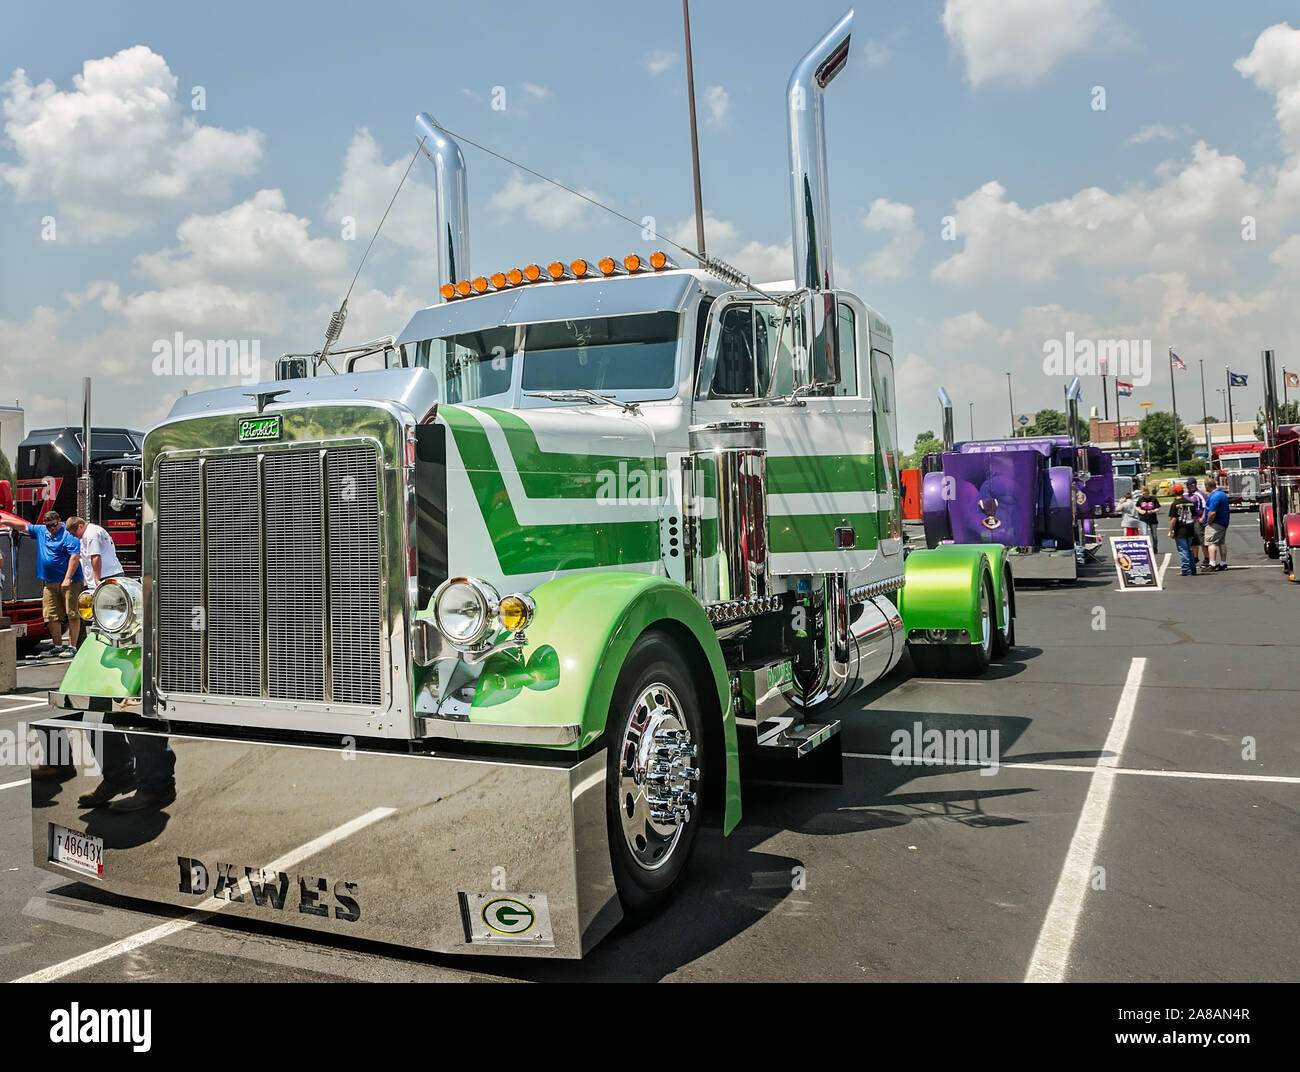 A 1988 Peterbilt 379 waits to be judged at the 34th annual Shell Rotella SuperRigs truck beauty contest, June 11, 2016, in Joplin, Missouri. Stock Photo